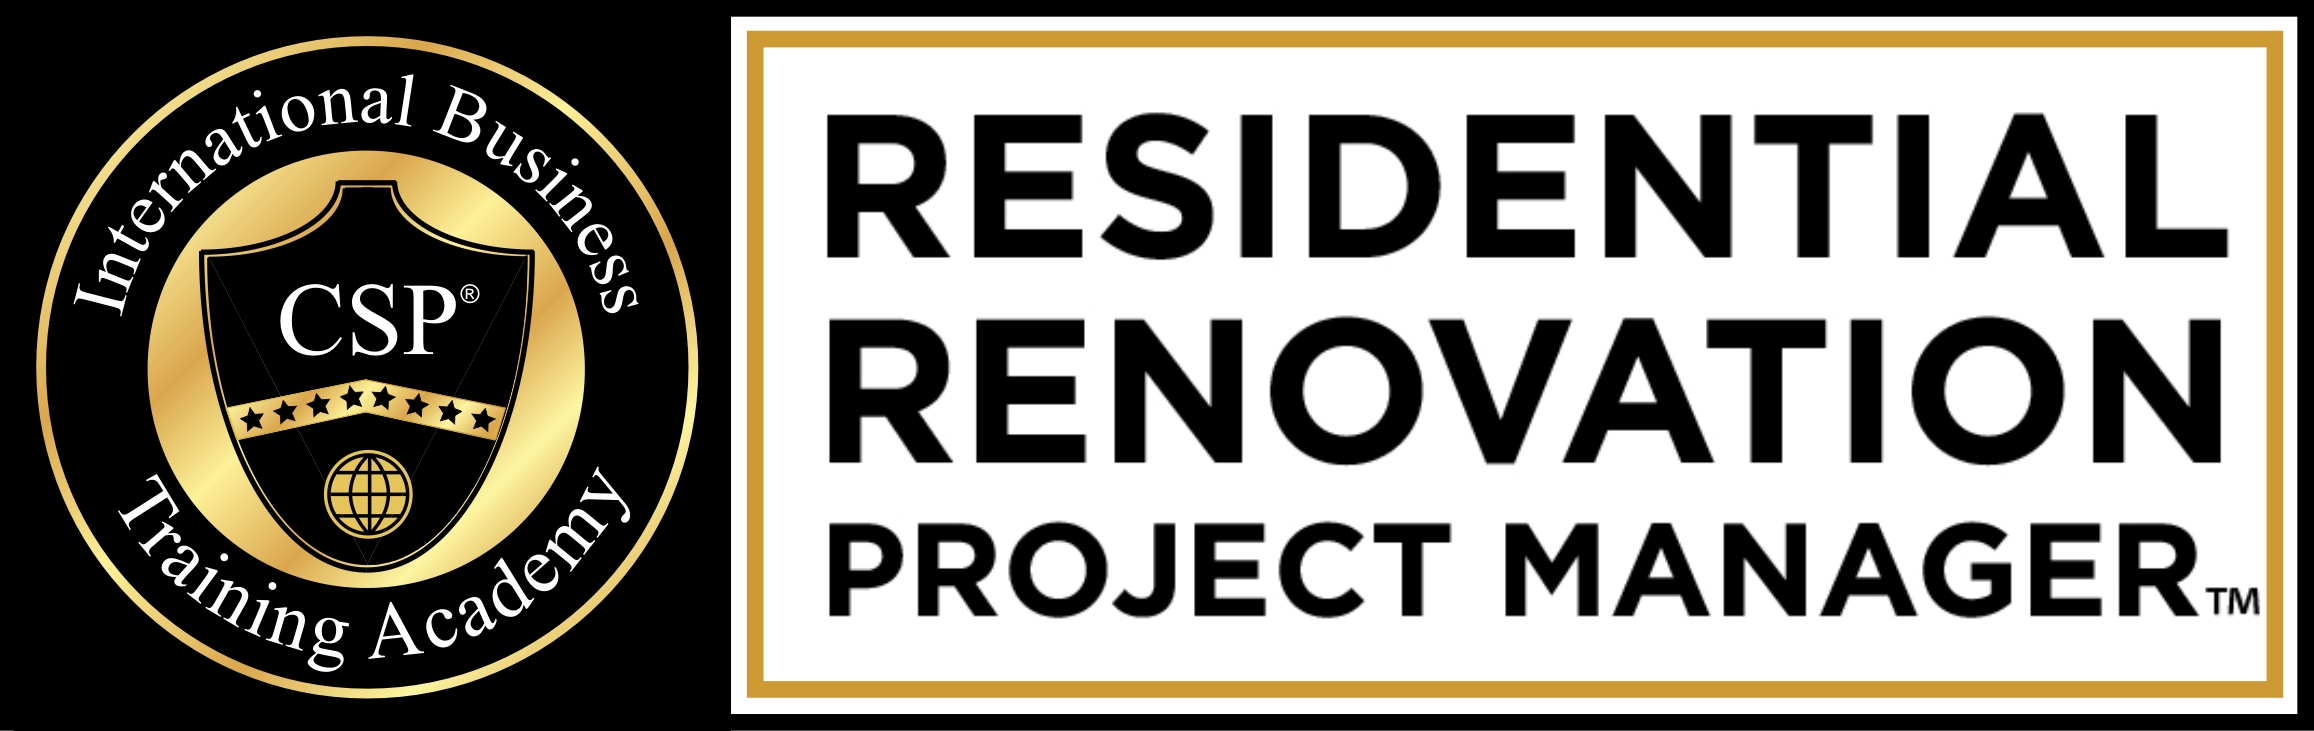 Residential Renovation Project Manager